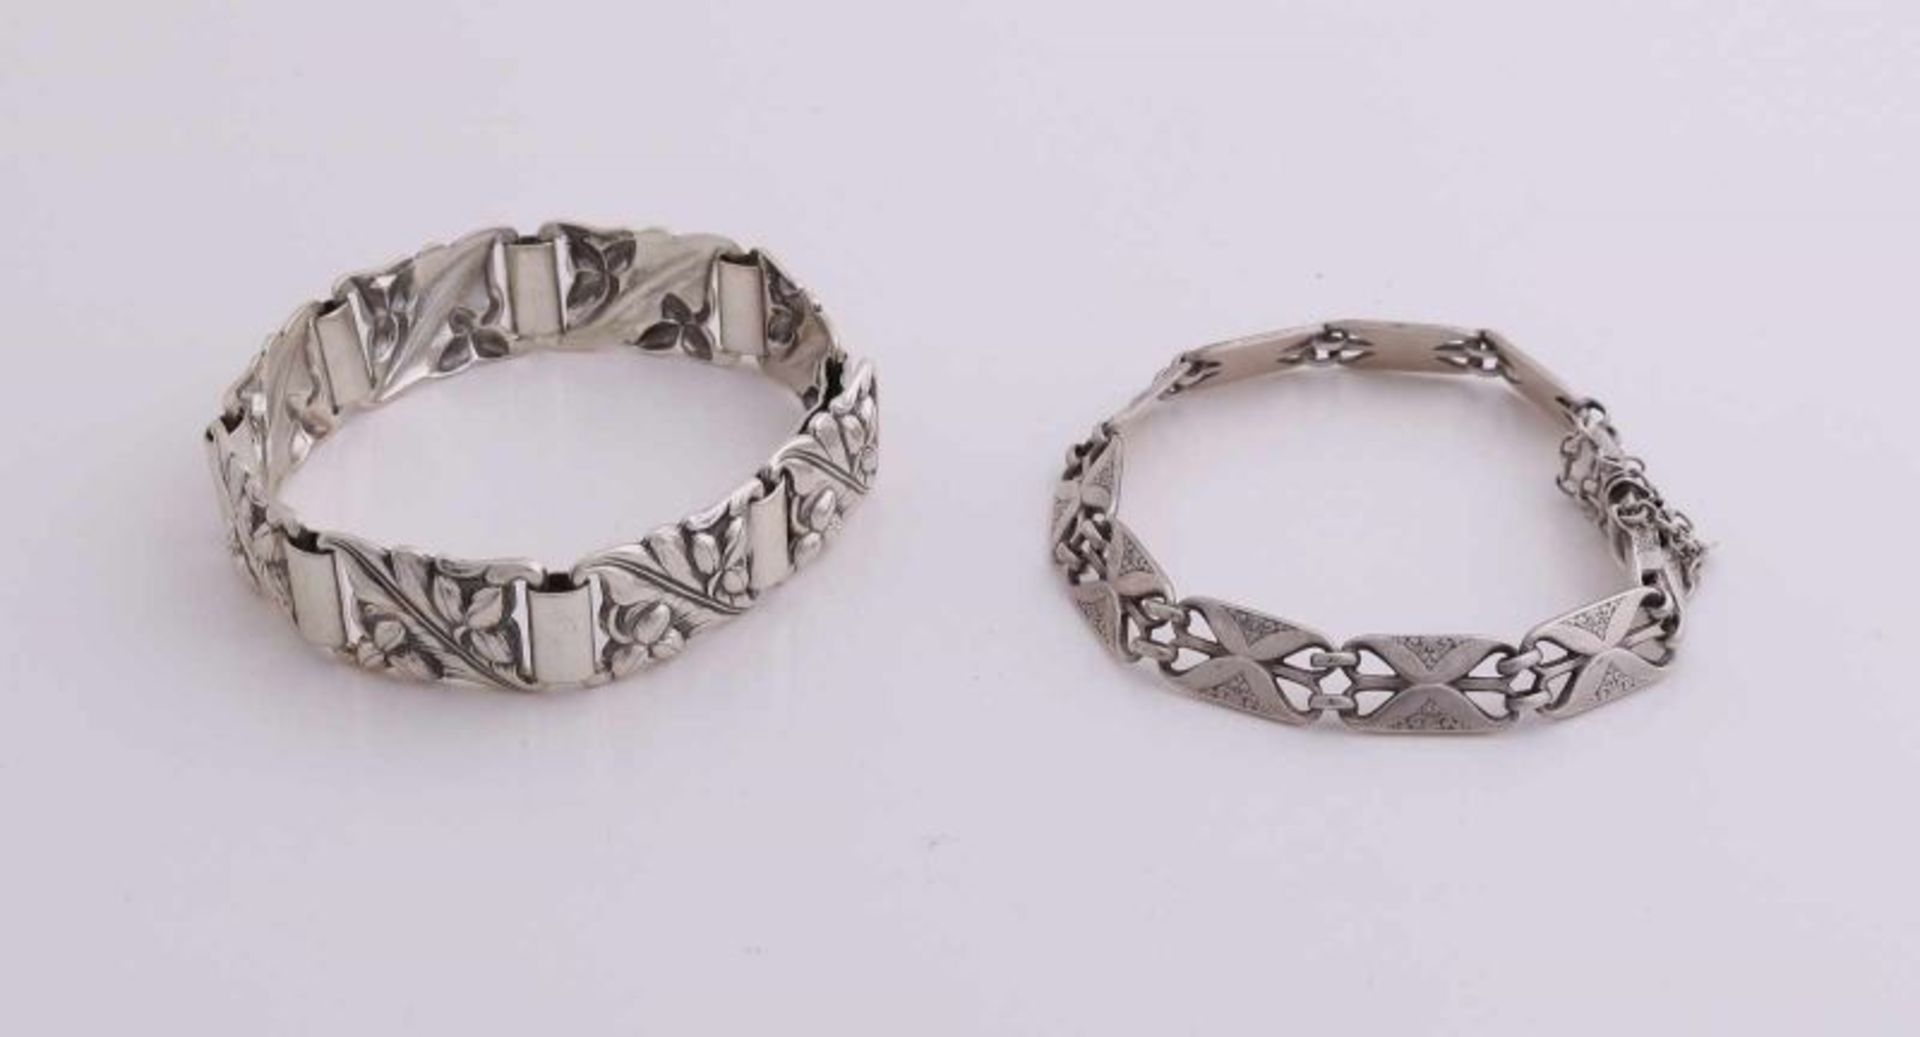 Two silver bracelets 800/000 made of rectangular links with floral decoration. One bracelet features